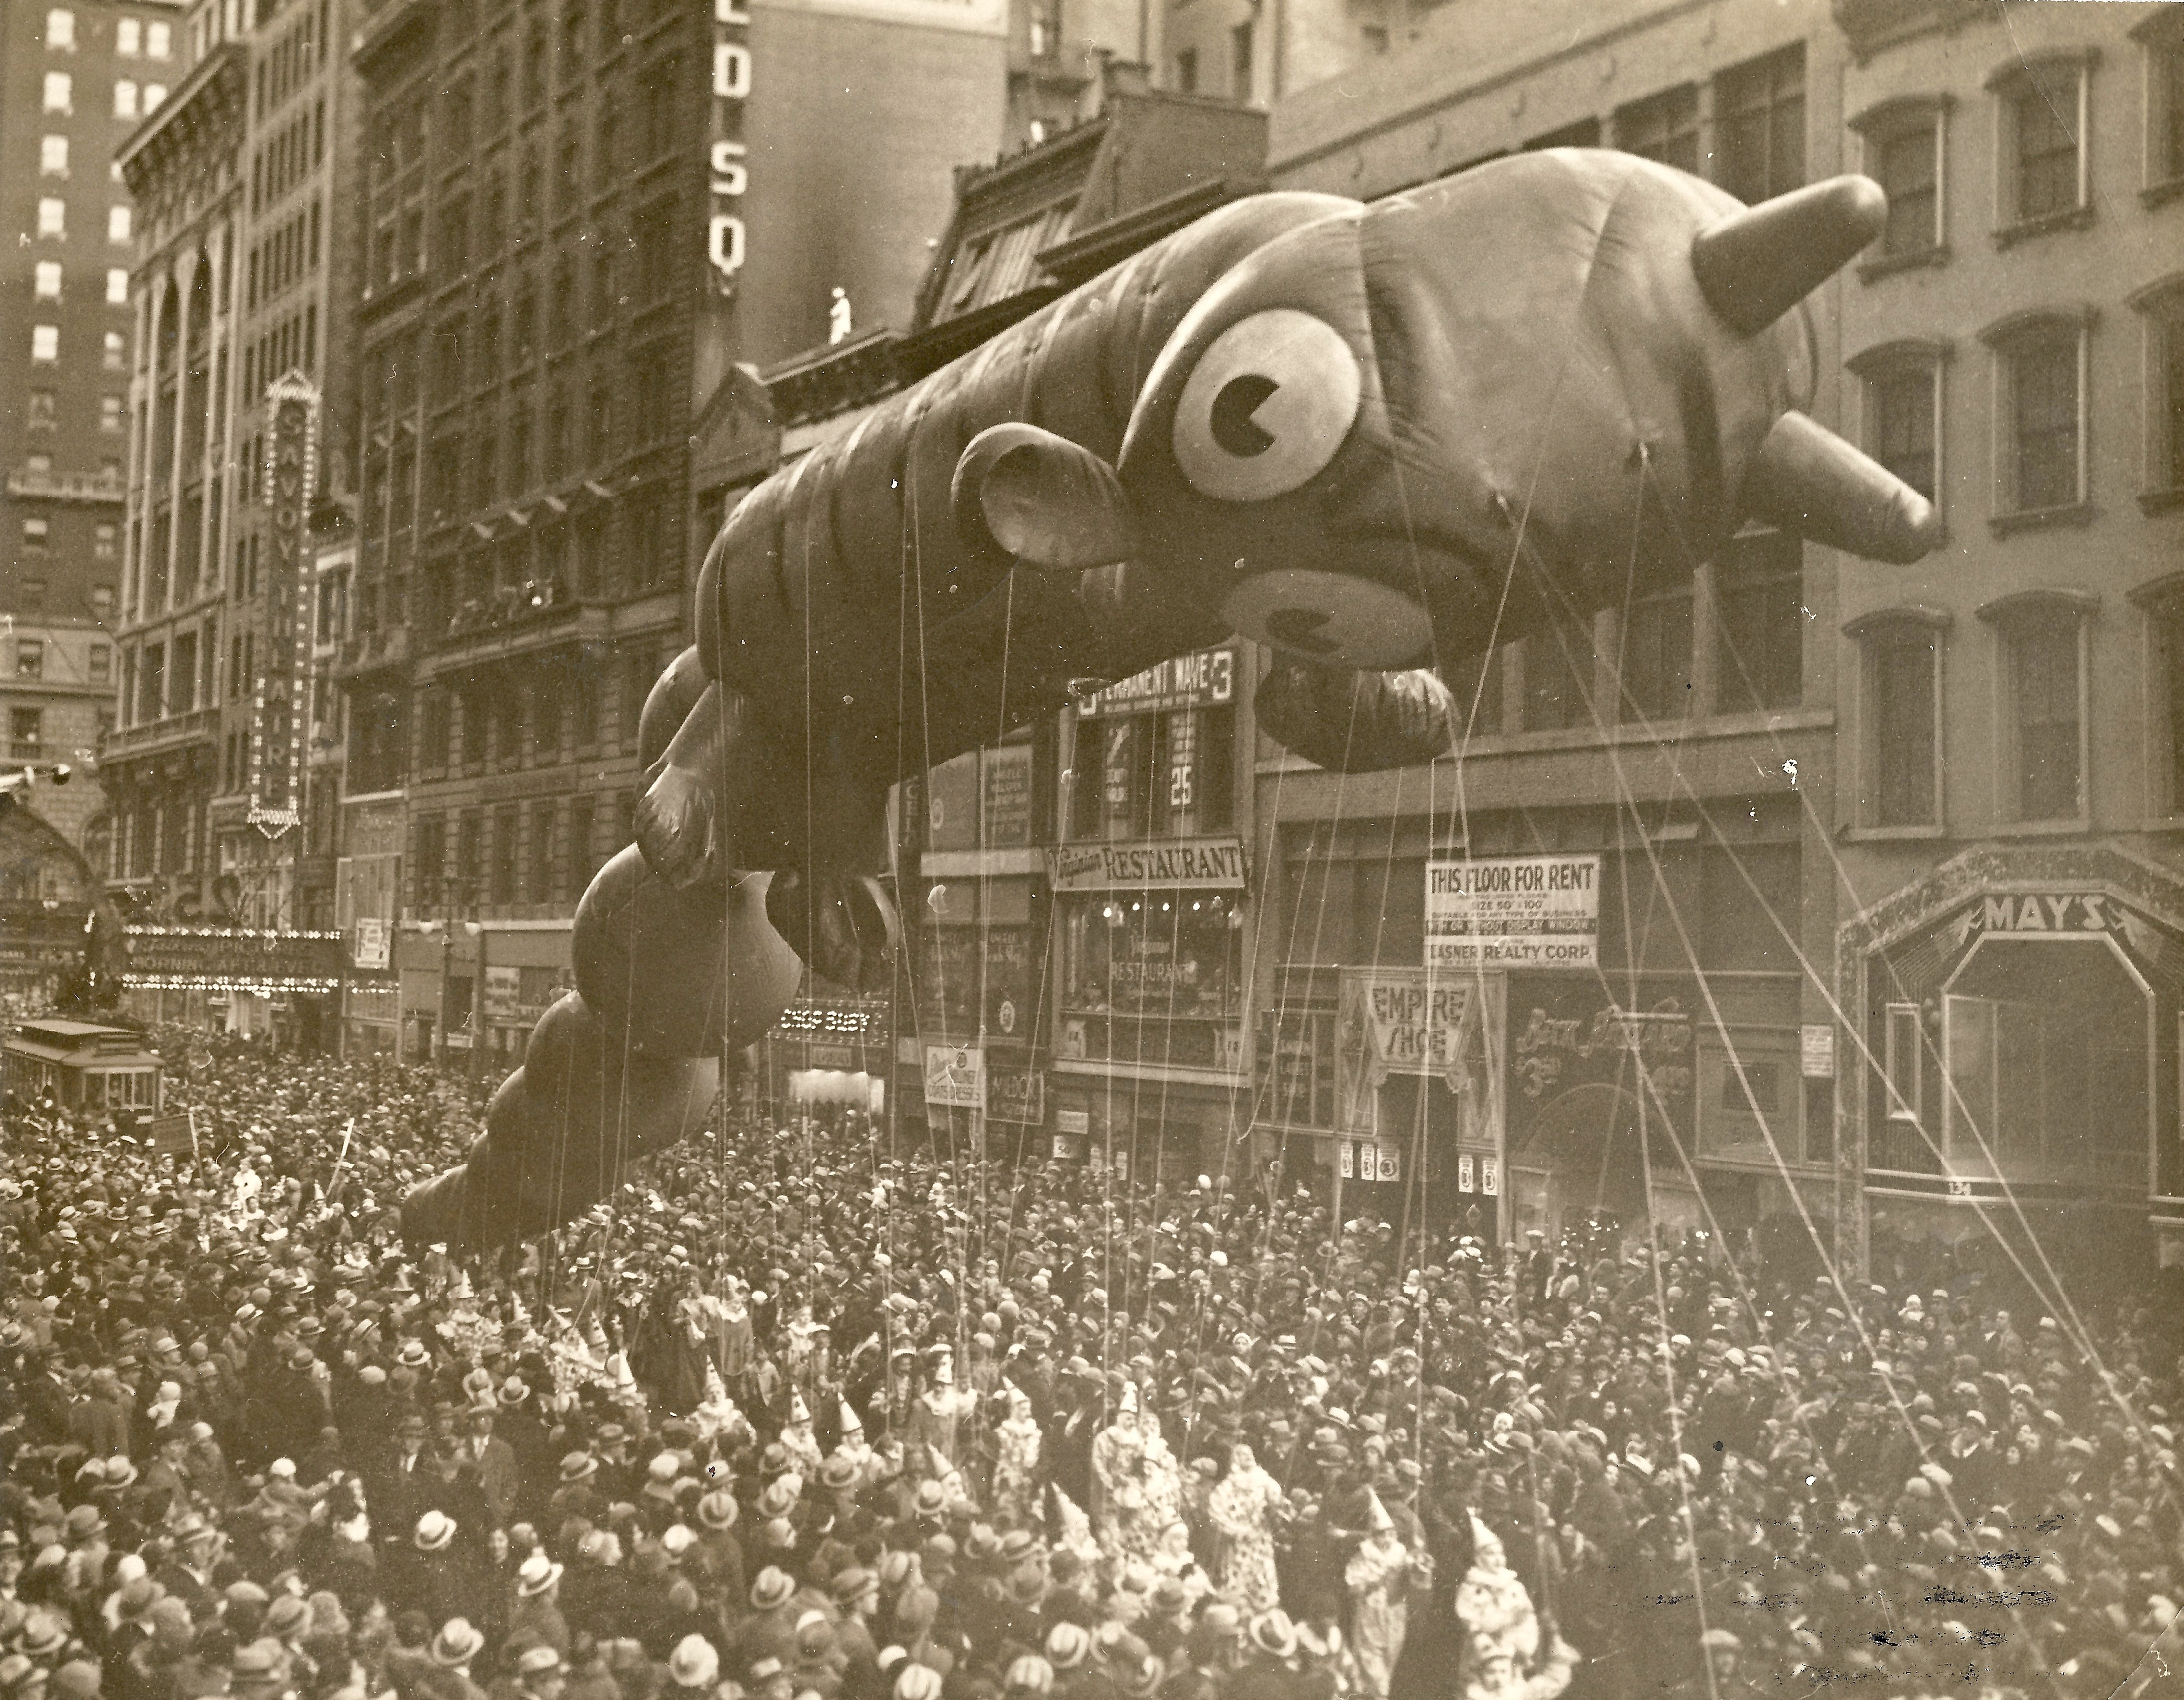 A black and white photo of a giant balloon in the Macy's Thanksgiving Day Parade in New York City